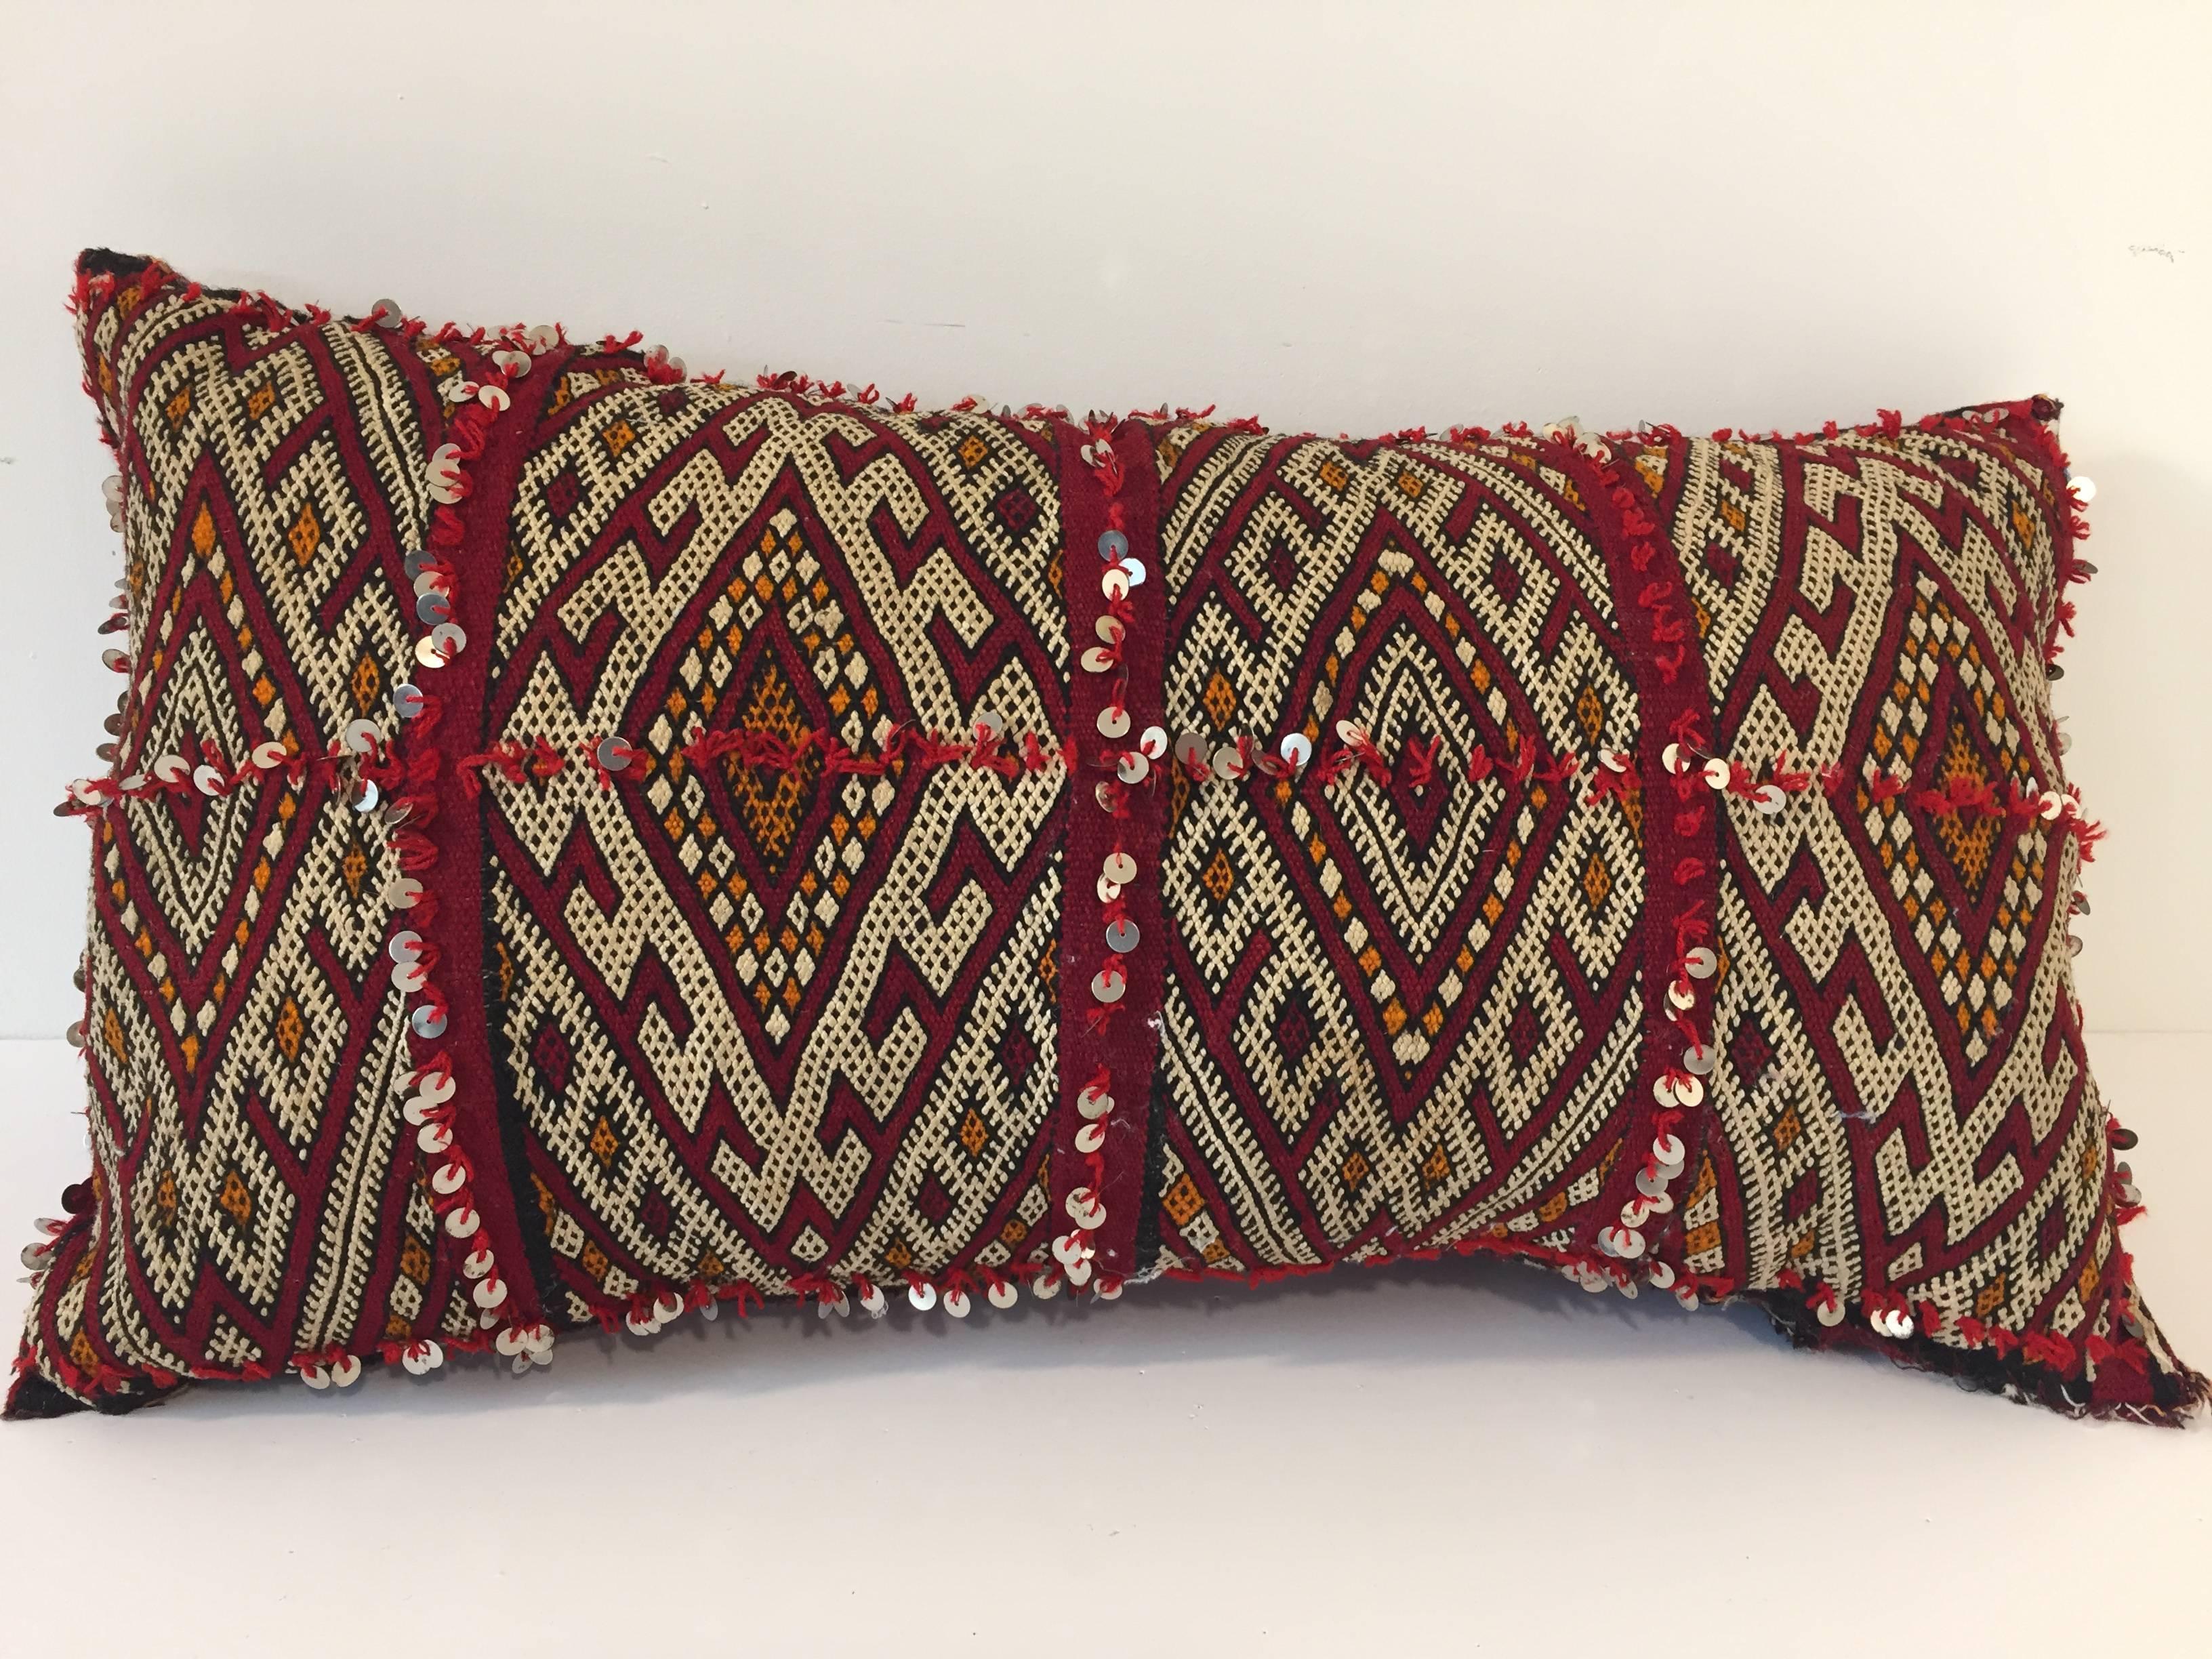 Hand-Woven Moroccan Tribal Pillow Red with Sequins